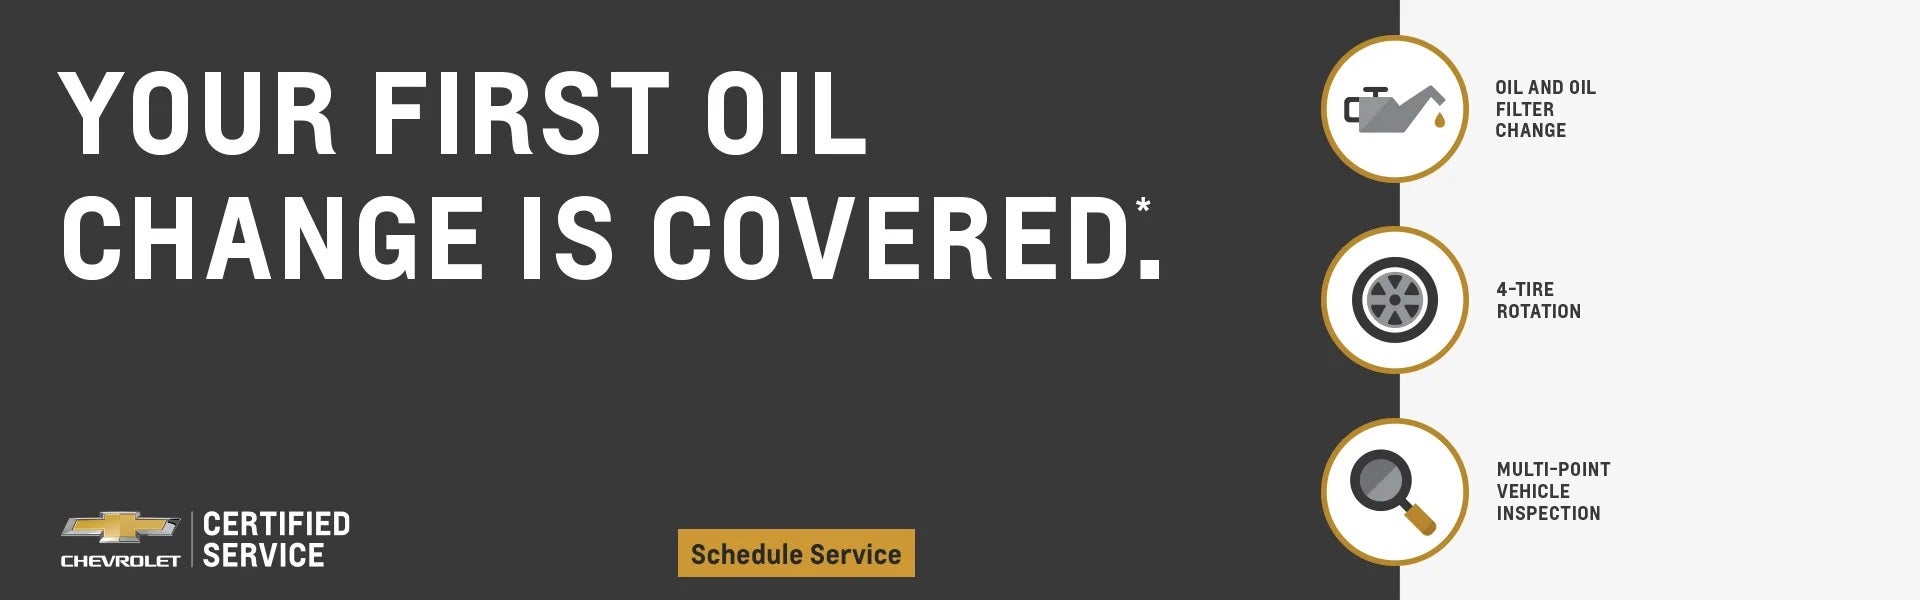 your first oil change is covered 